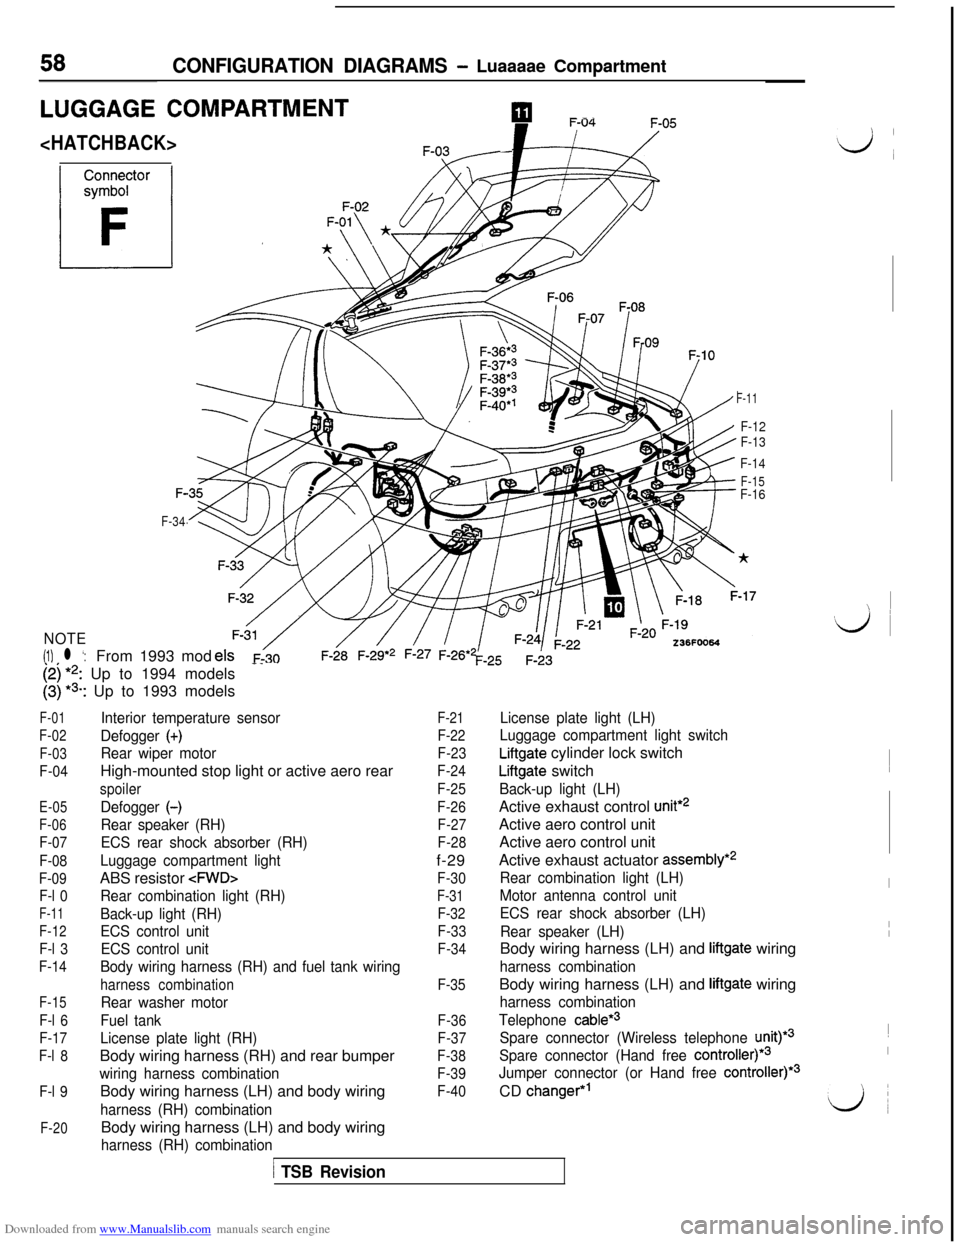 MITSUBISHI 3000GT 1992 2.G Repair Manual Downloaded from www.Manualslib.com manuals search engine 58CONFIGURATION DIAGRAMS - Luaaaae Compartment
LUGGAGE COMPARTMENTpIl --.
<HATCHBACK>-
F-11
F-12
F-13
F-14
F-15F-F-16
F-34
NOTE
(1) l ‘:From 